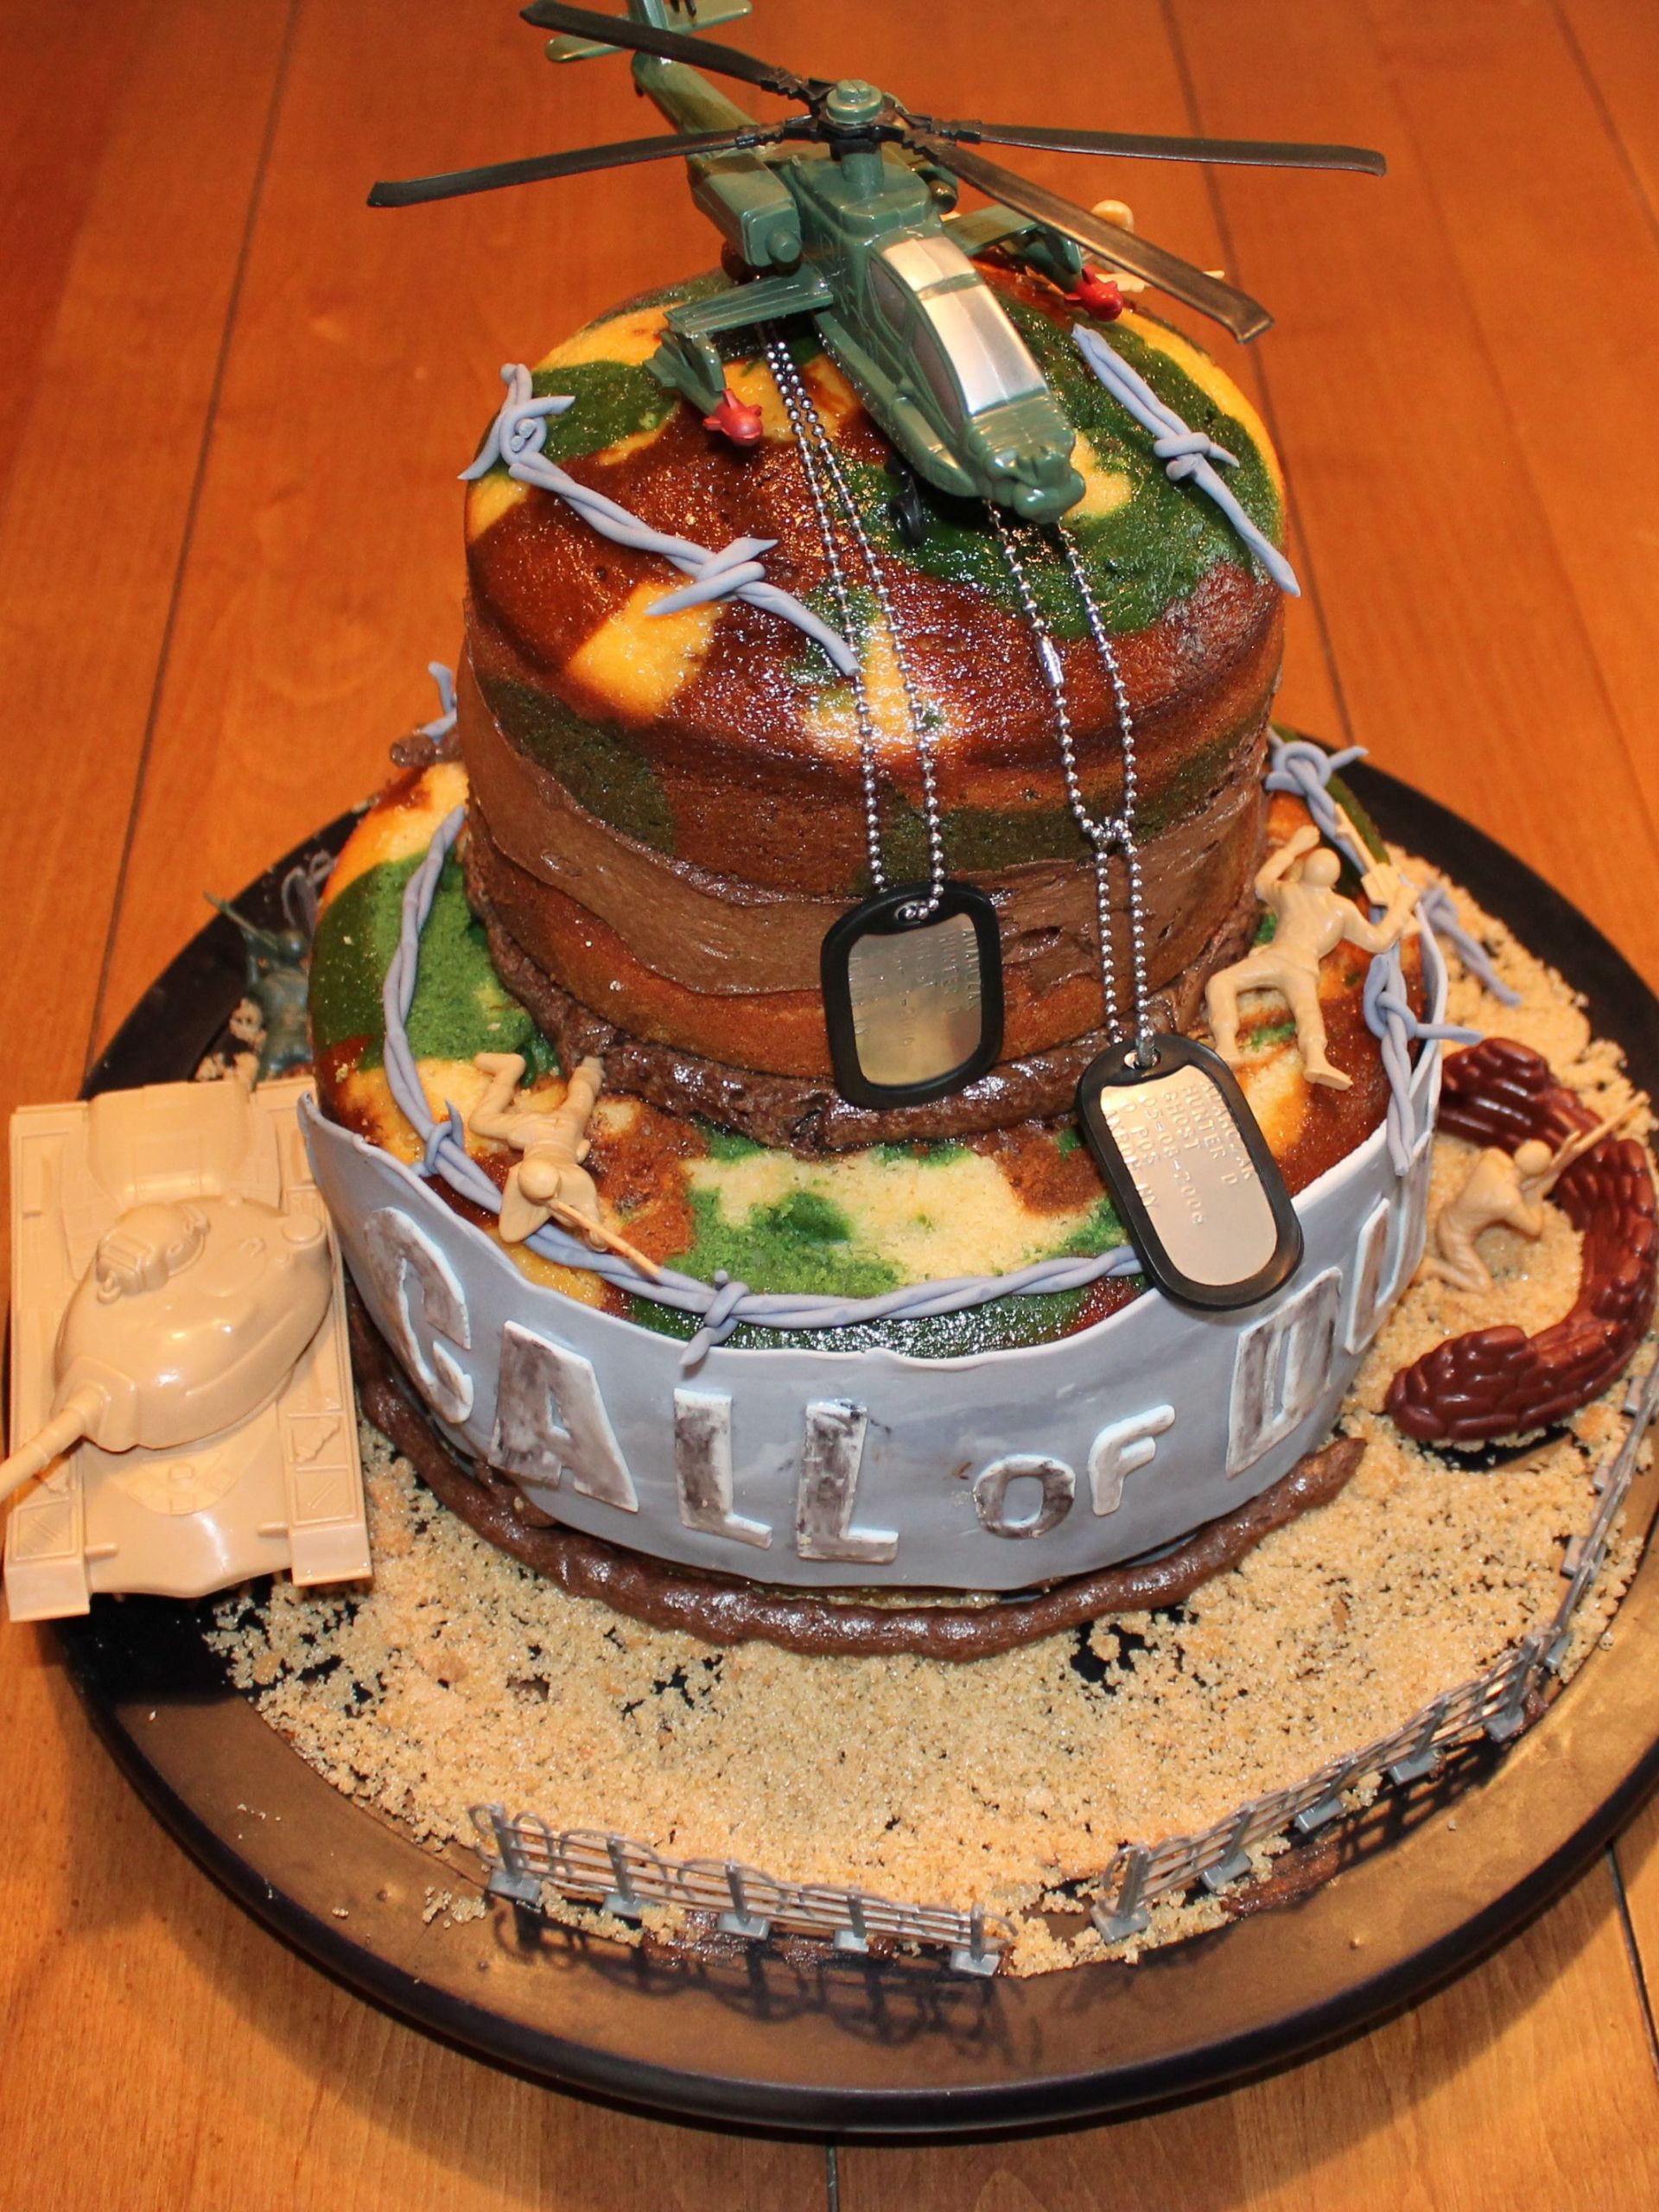 Call Of Duty Cake Recipe
 Call of Duty camouflage cake